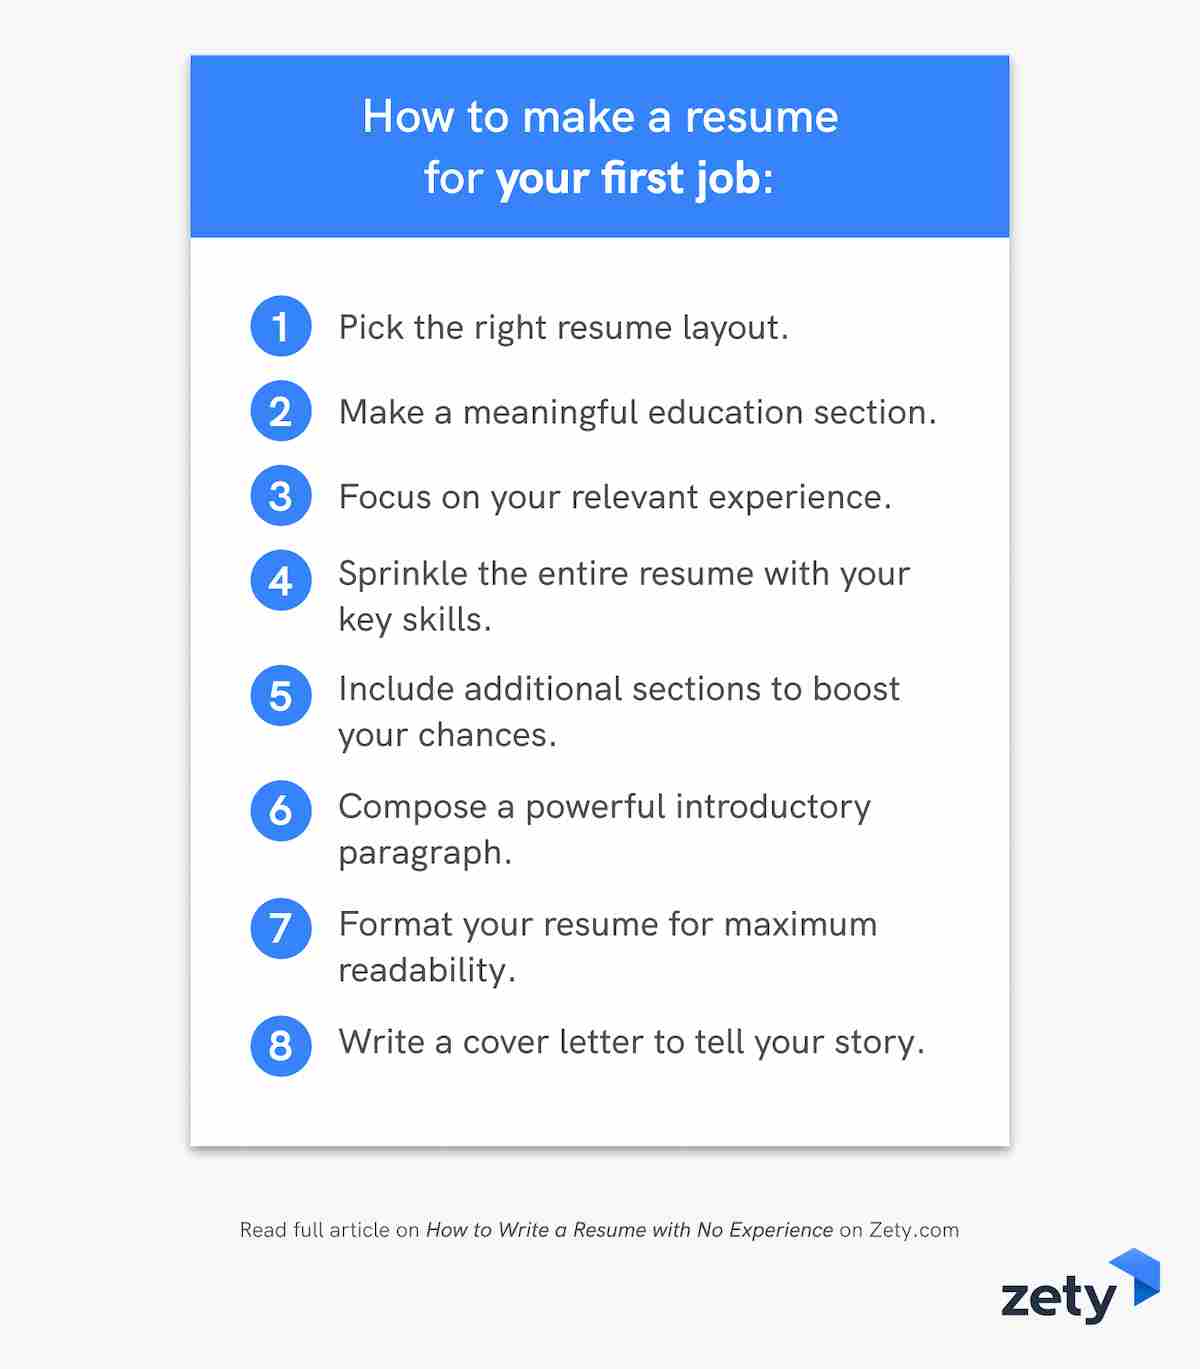 How to make a resume for your first job